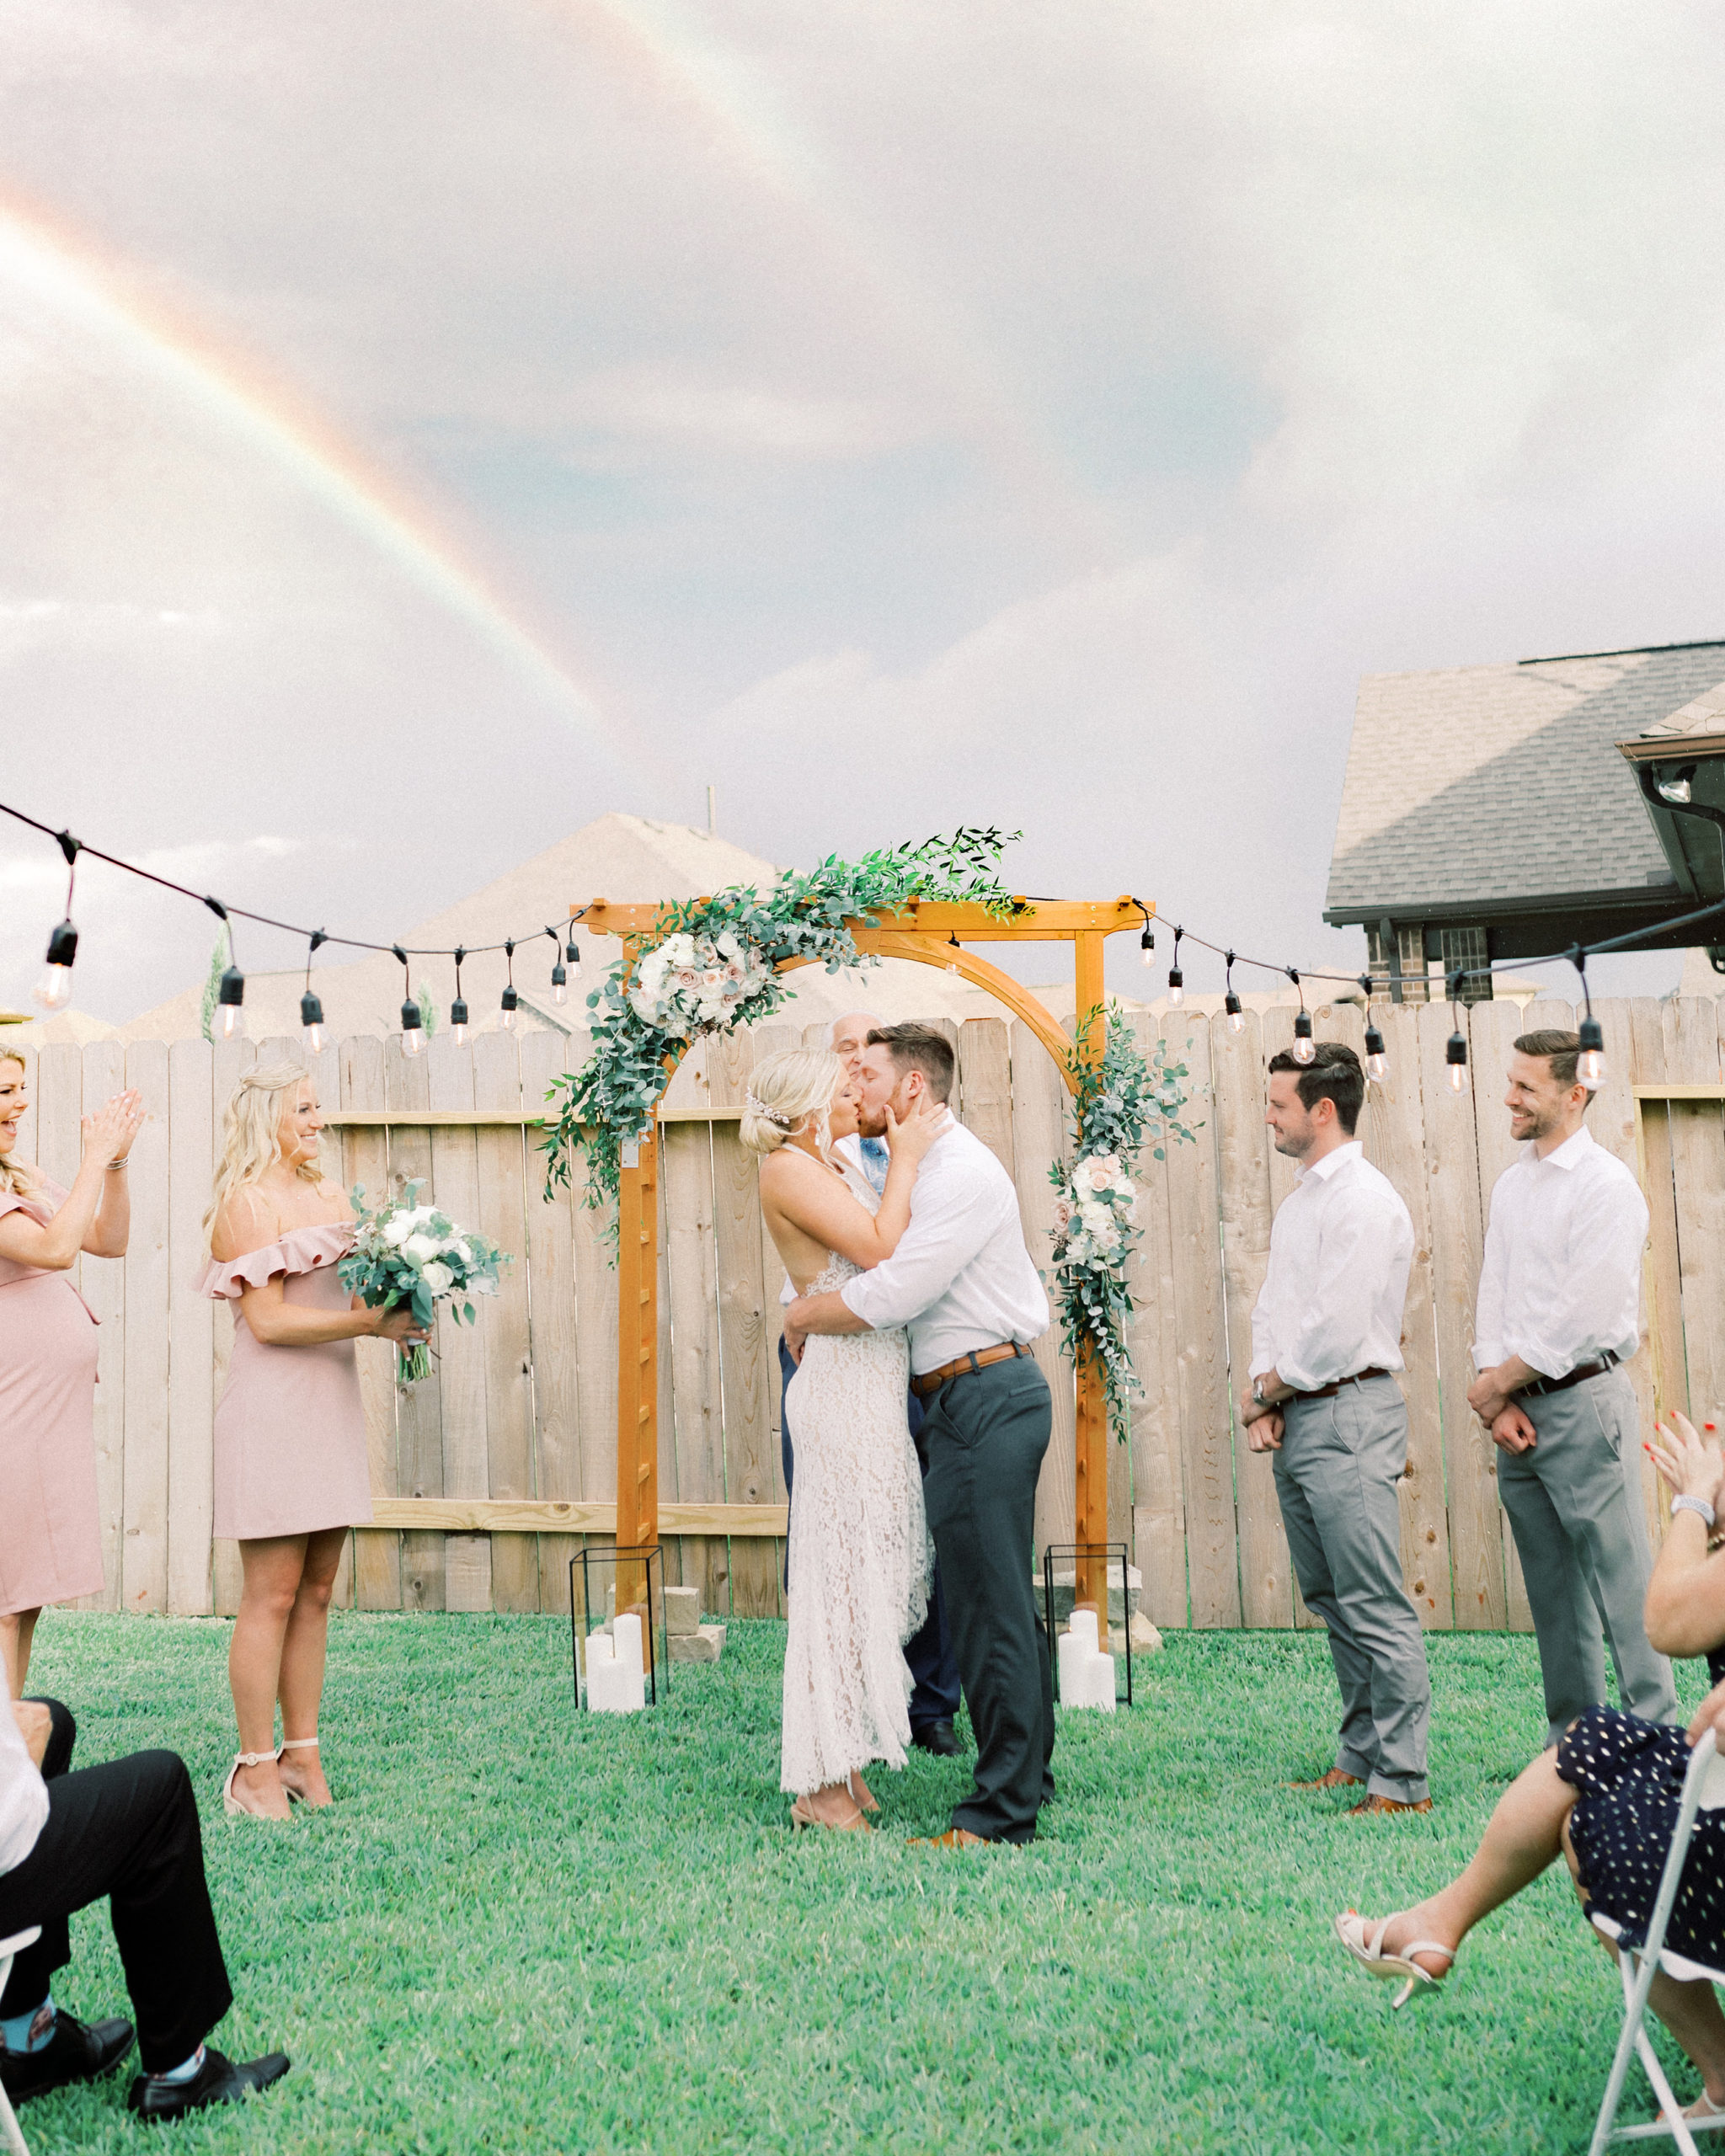 Married couple kissing under a double rainbow